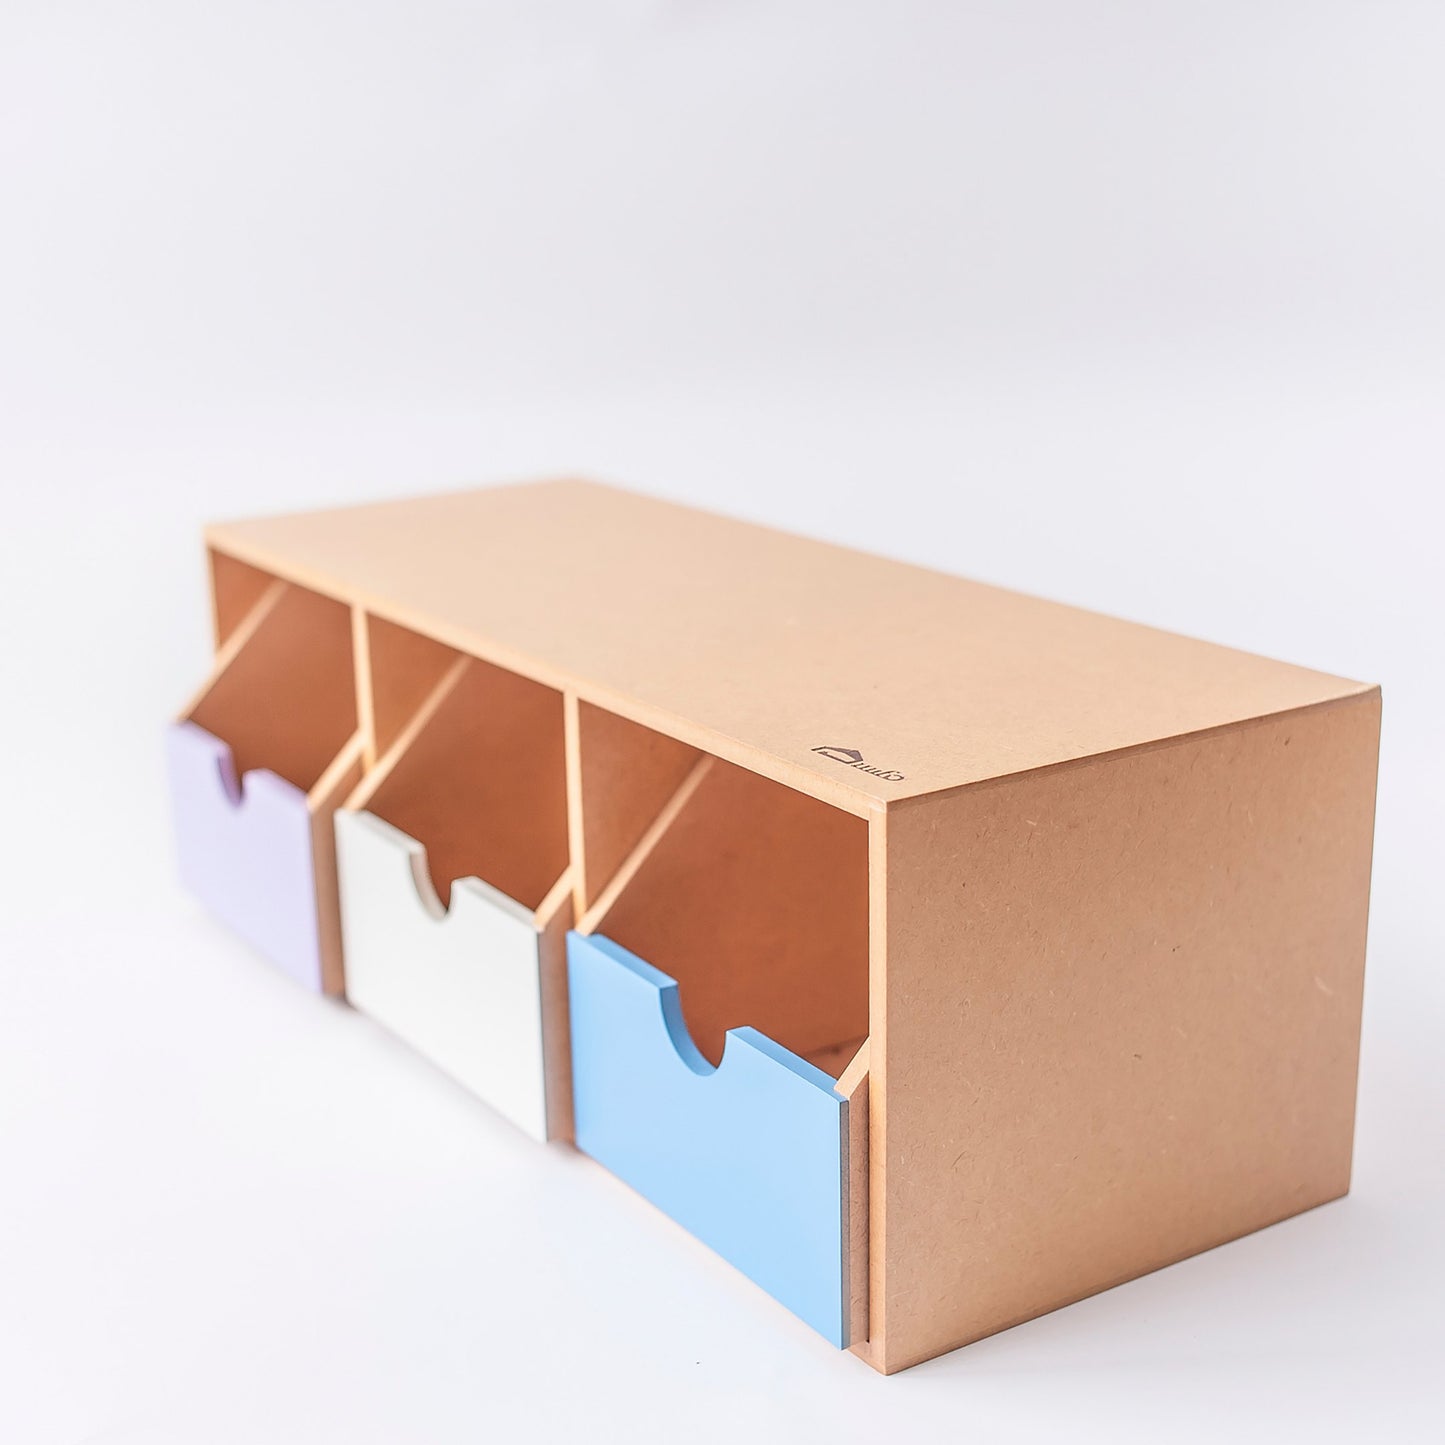 Mifo Wood Art 3-Compartment Horizontal/Vertical Stationery Box (FOR METRO MANILA & RIZAL* Shipping Only)